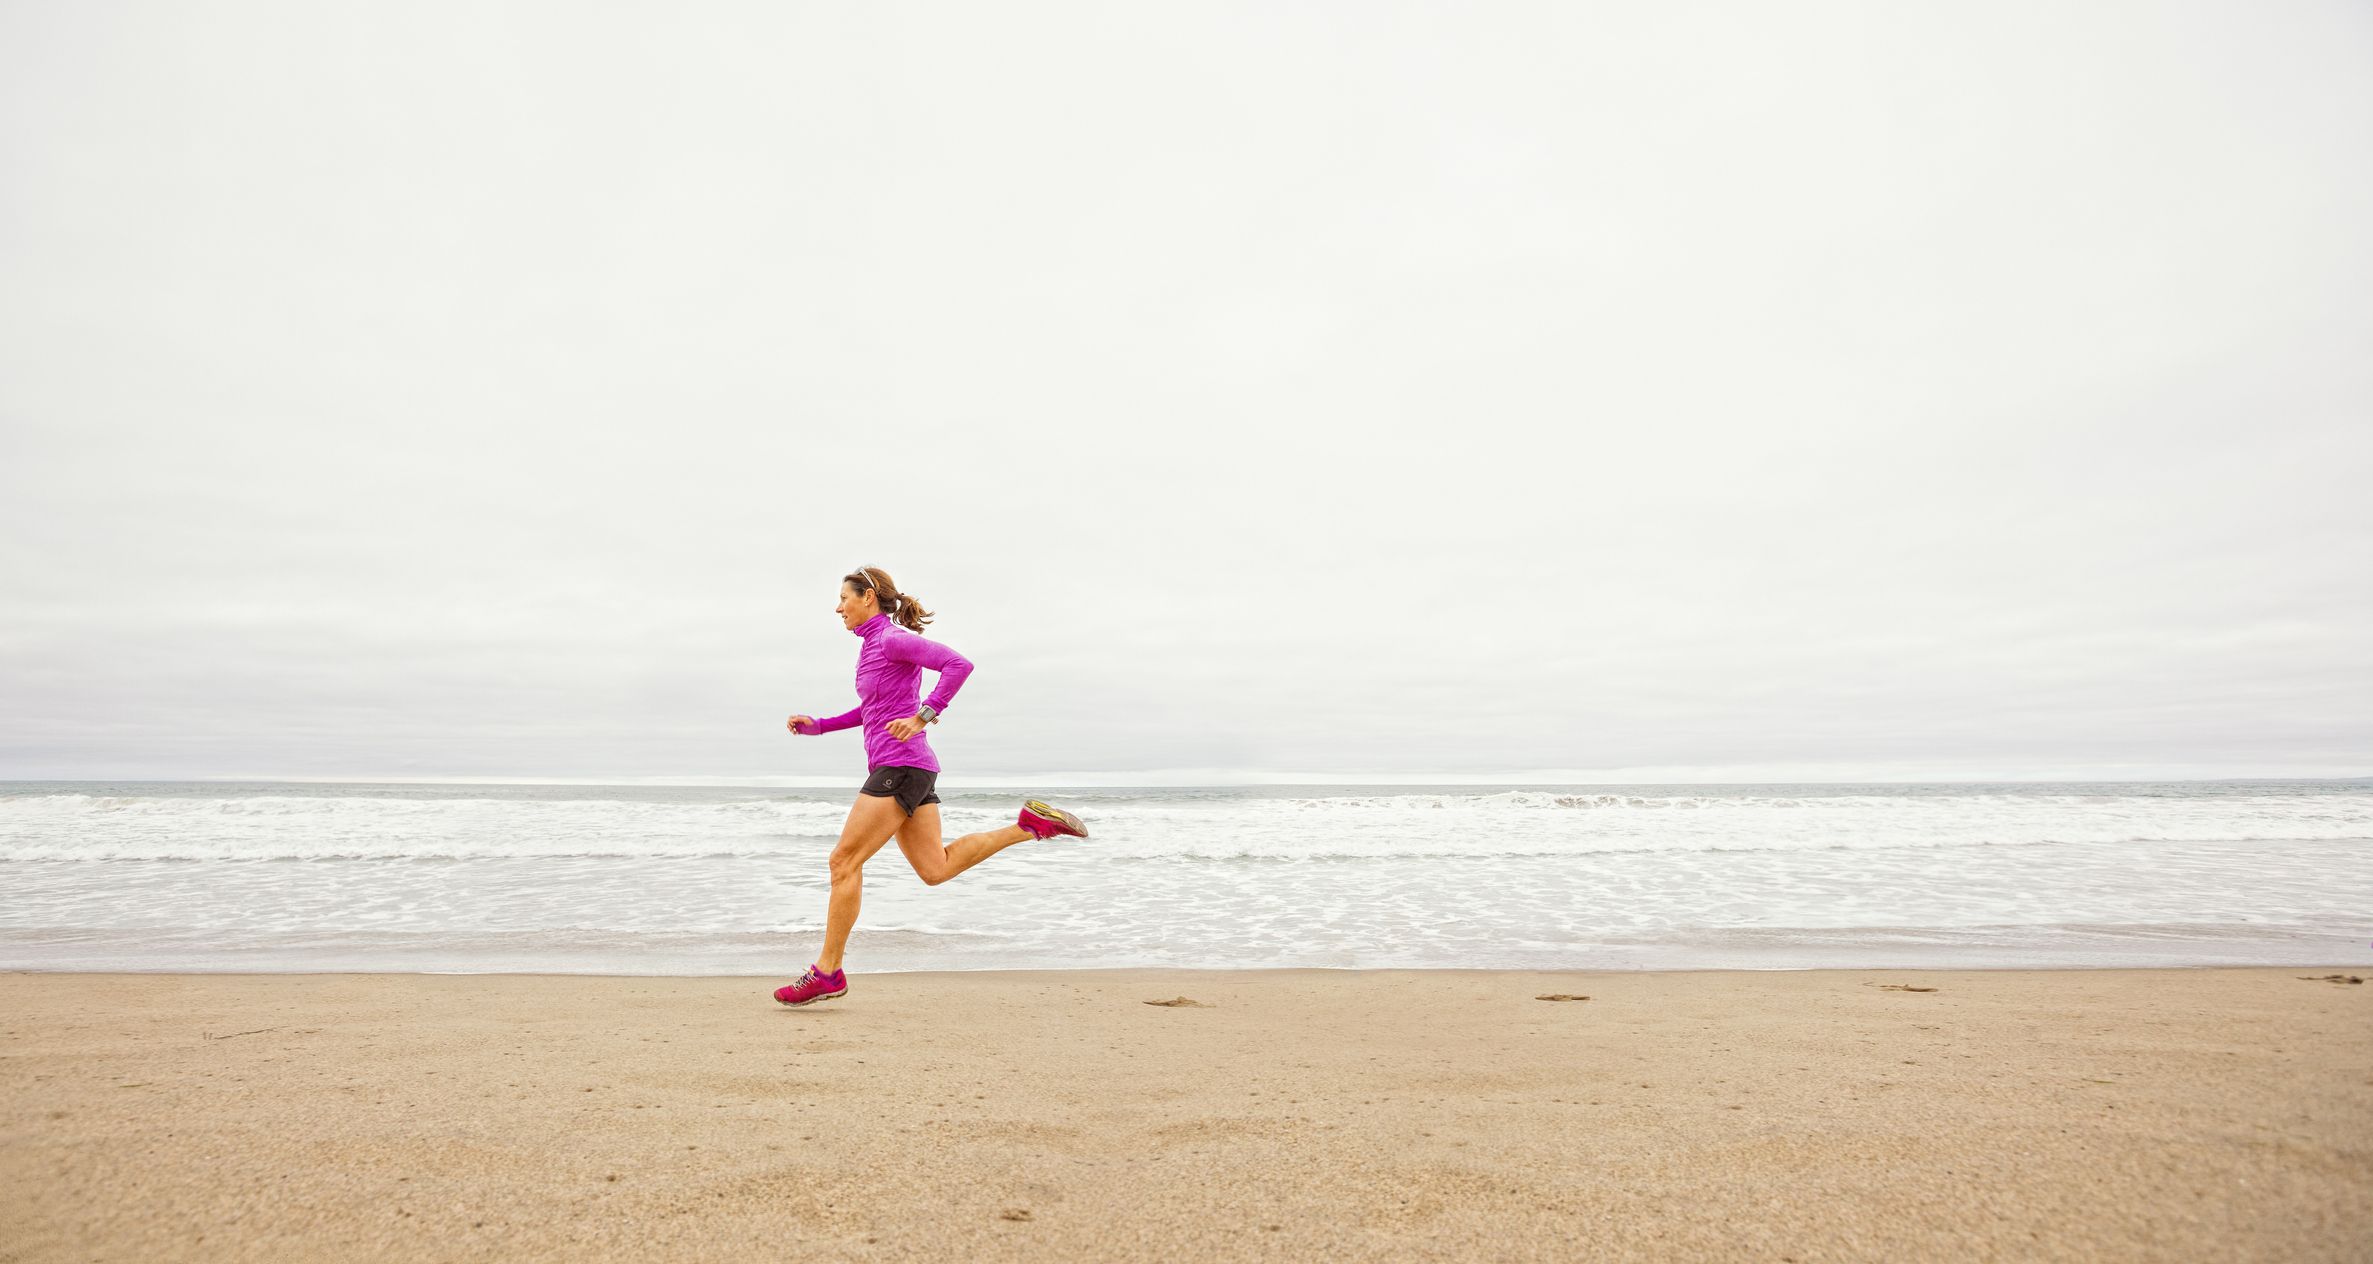 Stride length: How it affects running performance